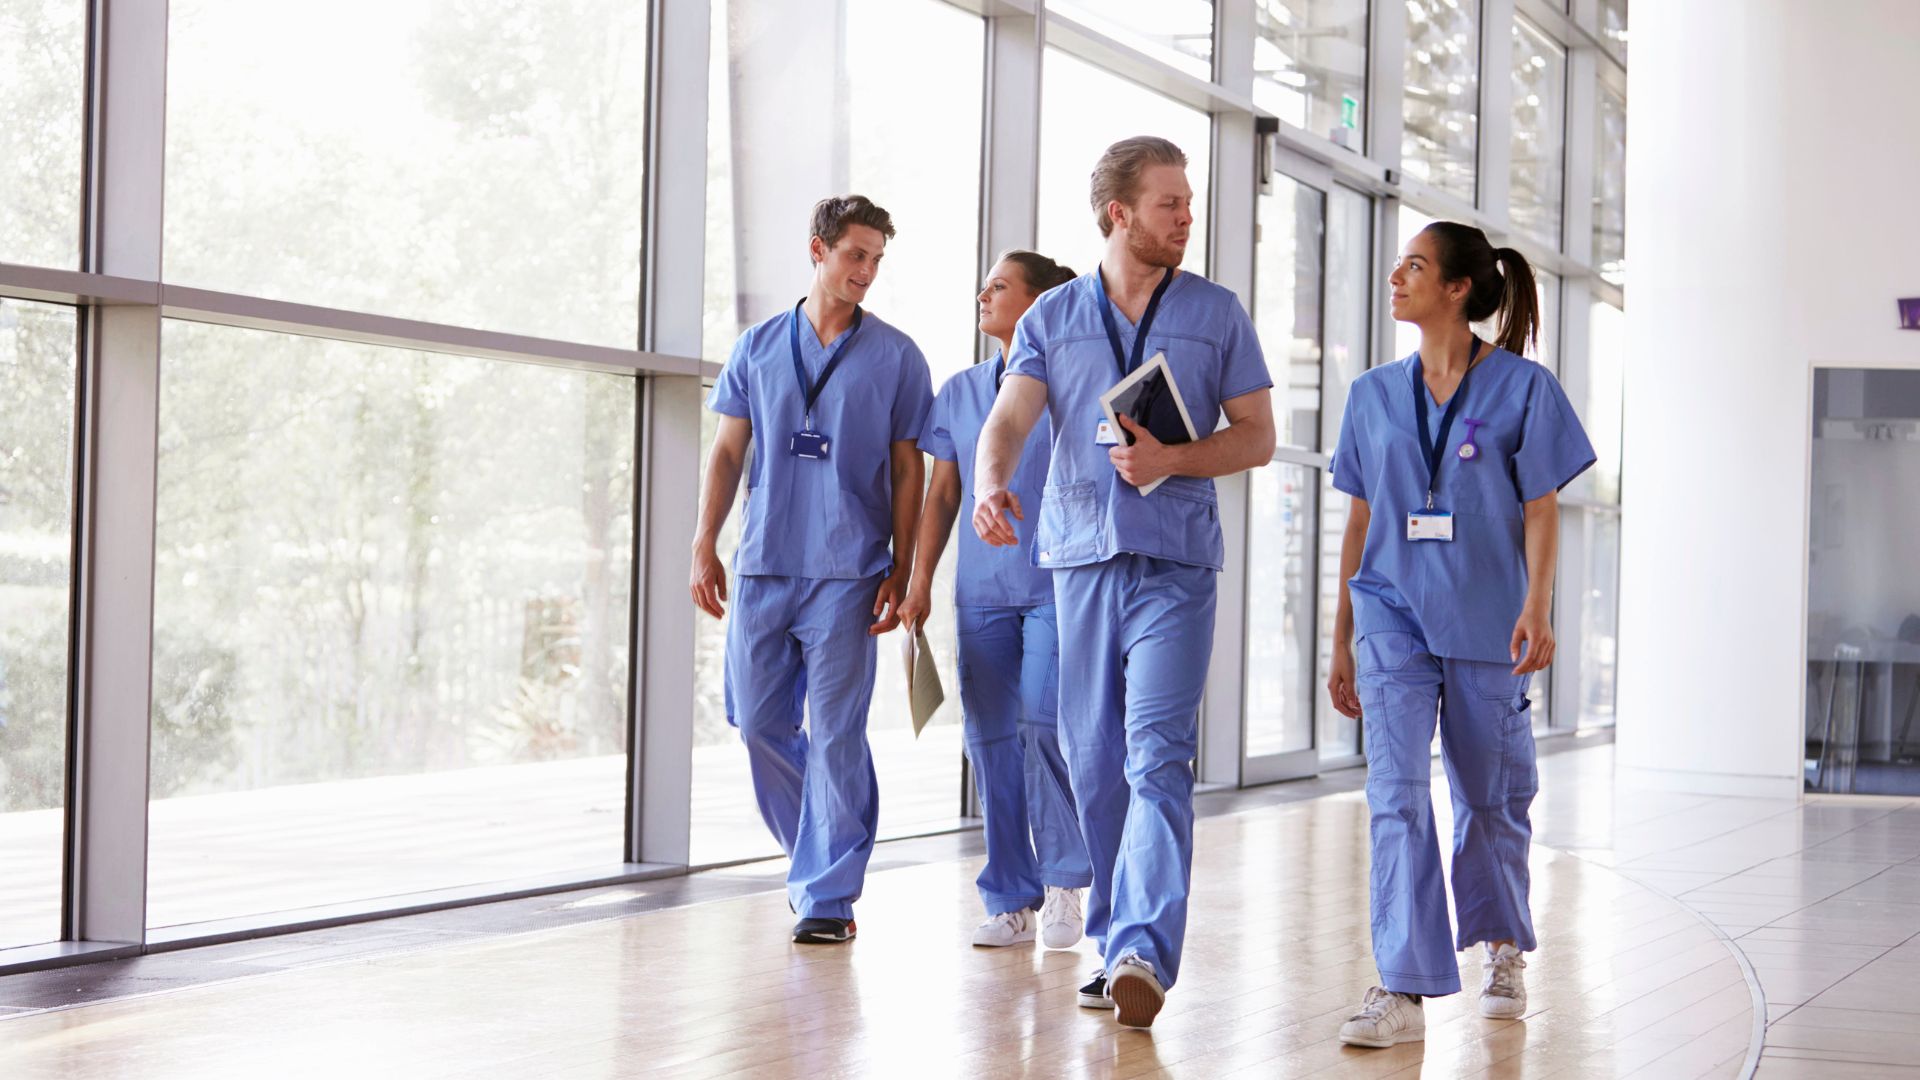 team of nurses walking down the hall while having a conversation.